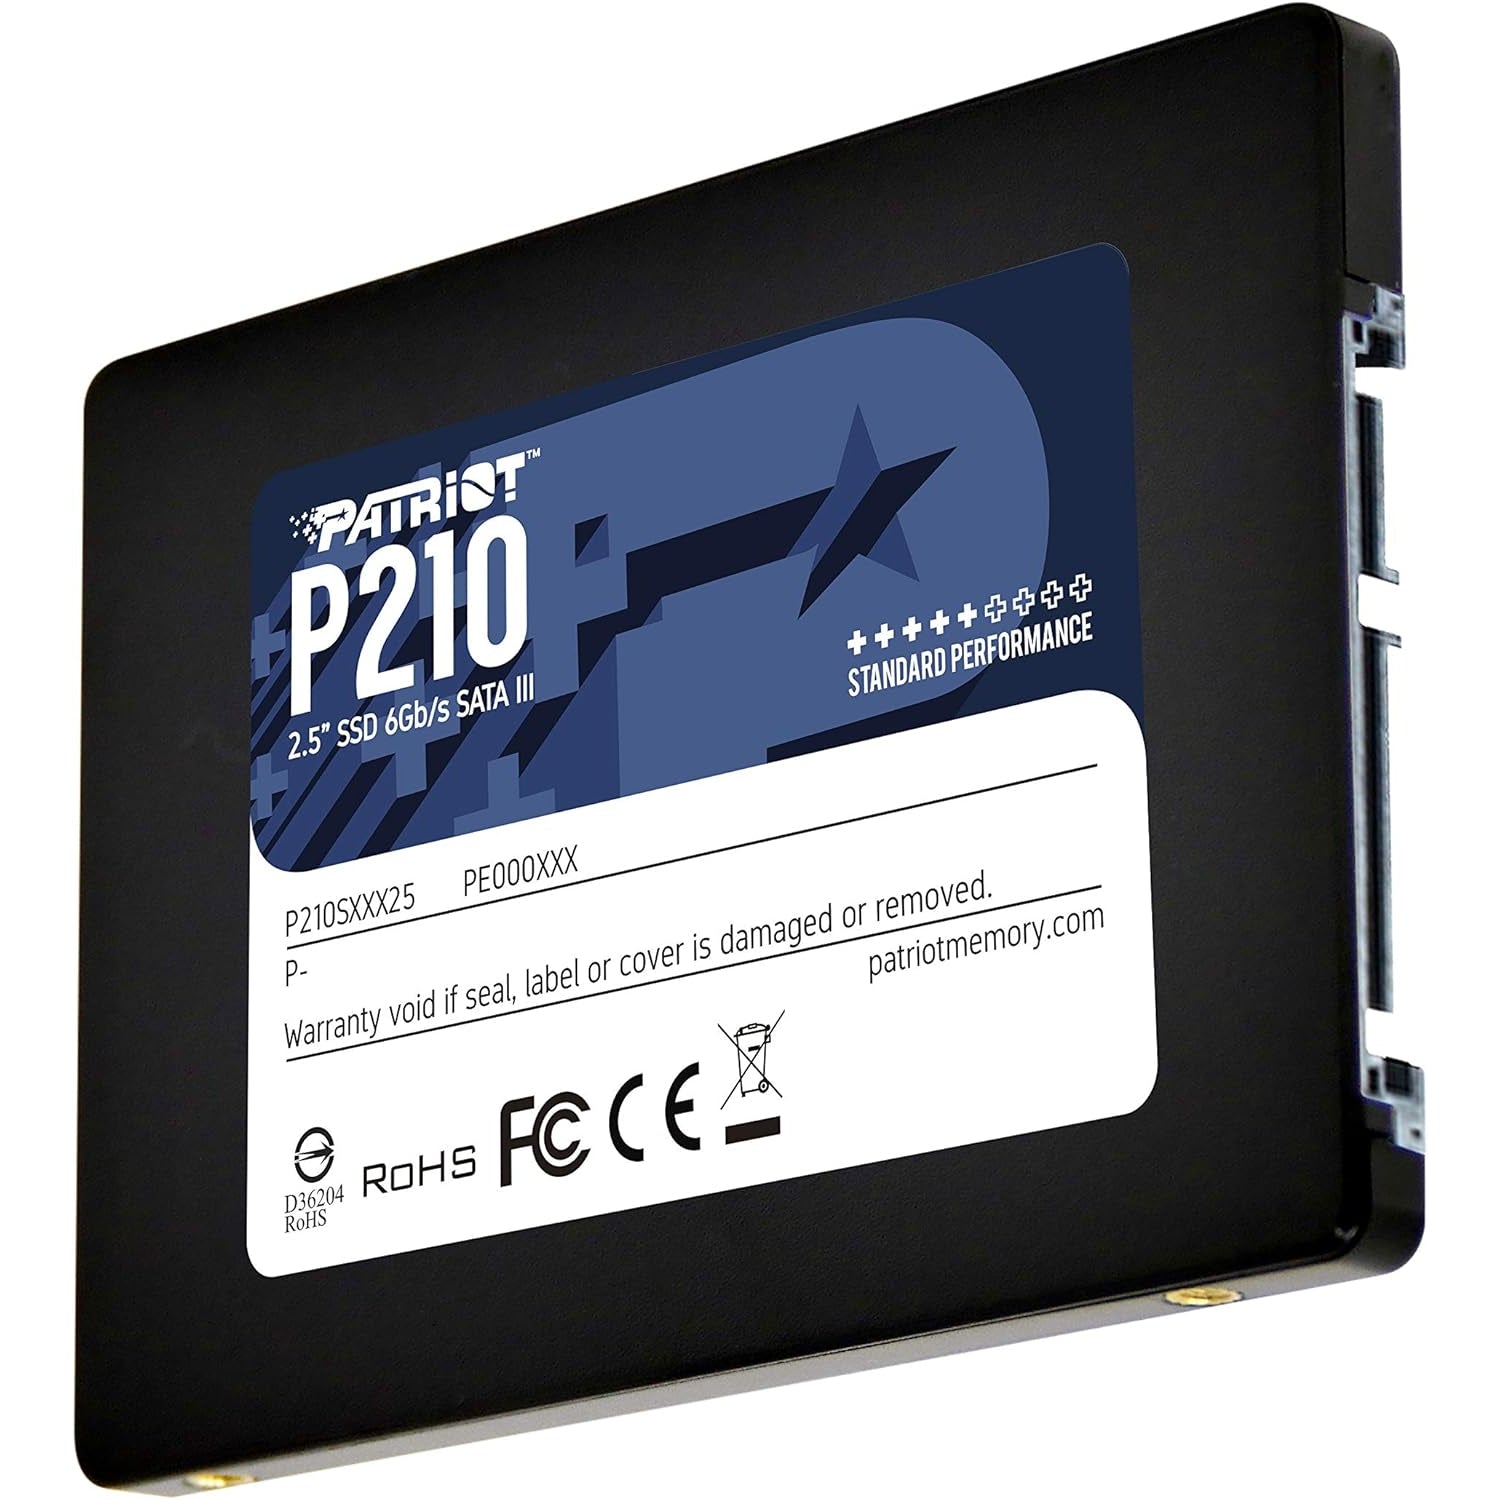 Patriot P210 SSD 2TB SATA 3, Internal Solid State Drive 2.5 Inches, Read speeds up to 520MB/s, Write speeds up to 430MB/s, O/S Supported - Windows 7/8.0/8.1/10 (P210S2TB25)